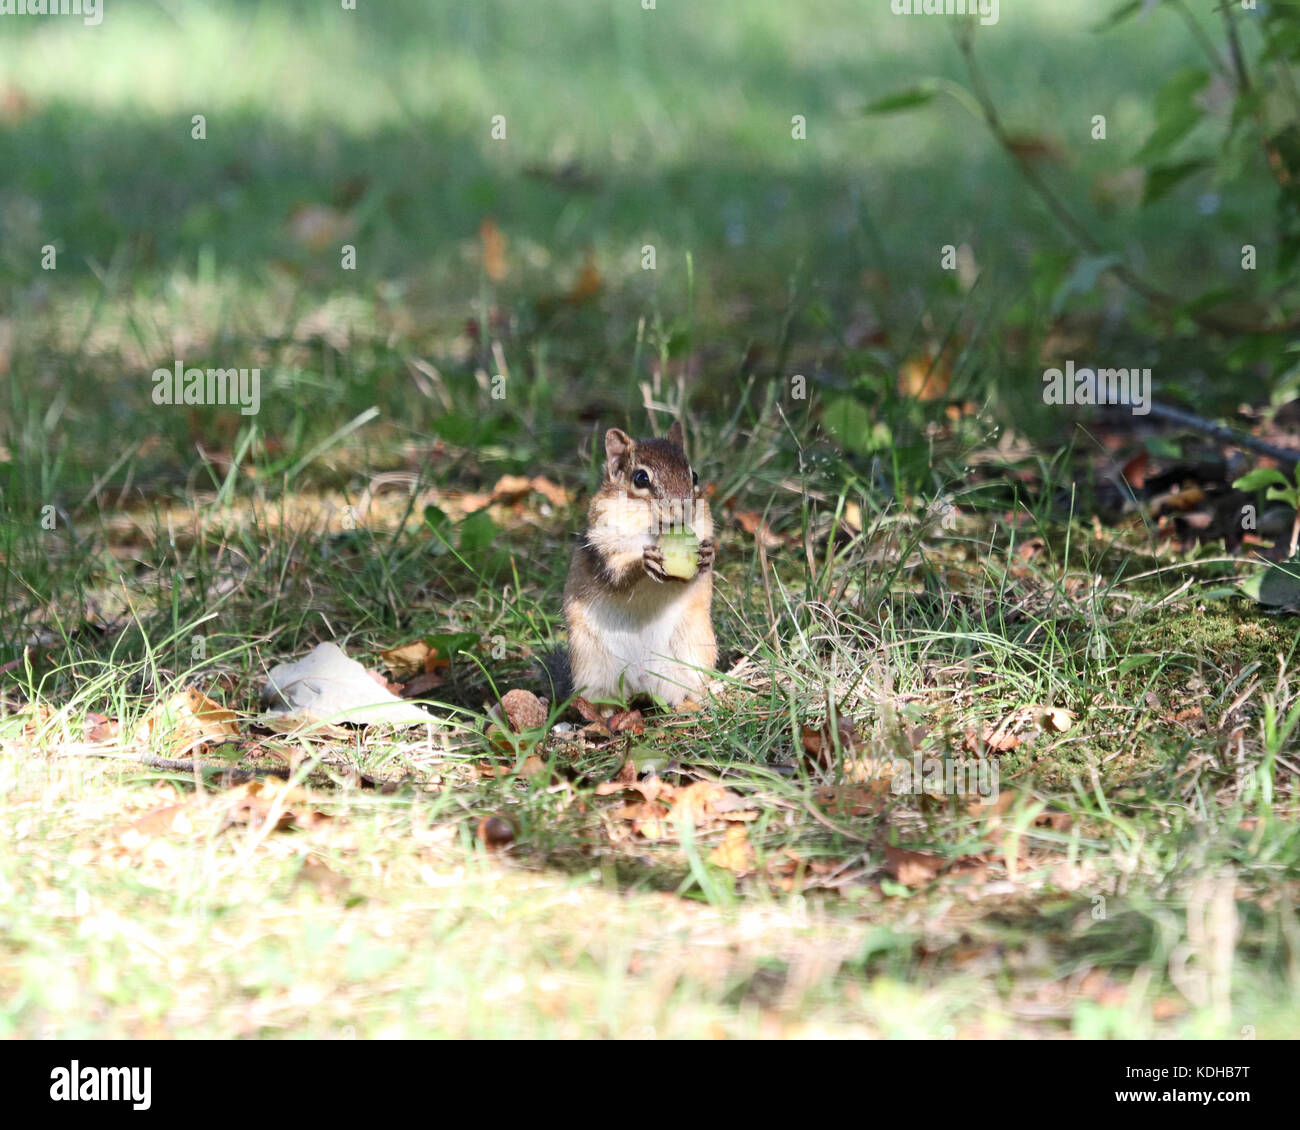 Adorable Chipmunk holding a green nut to it's mouth Stock Photo